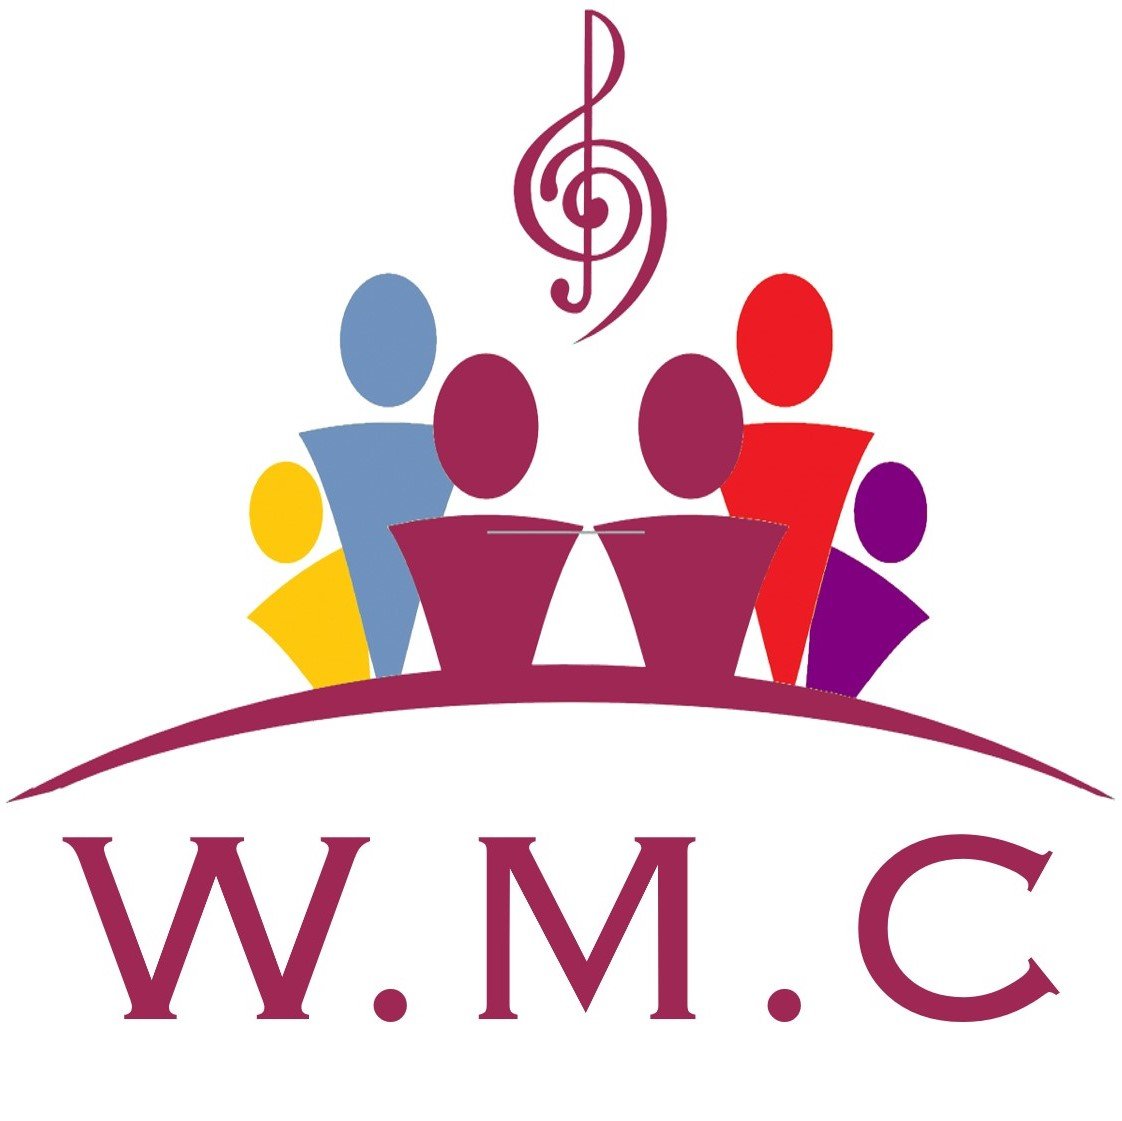 WMC is an award-winning, not-for-profit organisation providing quality music provision in Wrexham. A fresh approach to music provision throughout the county.